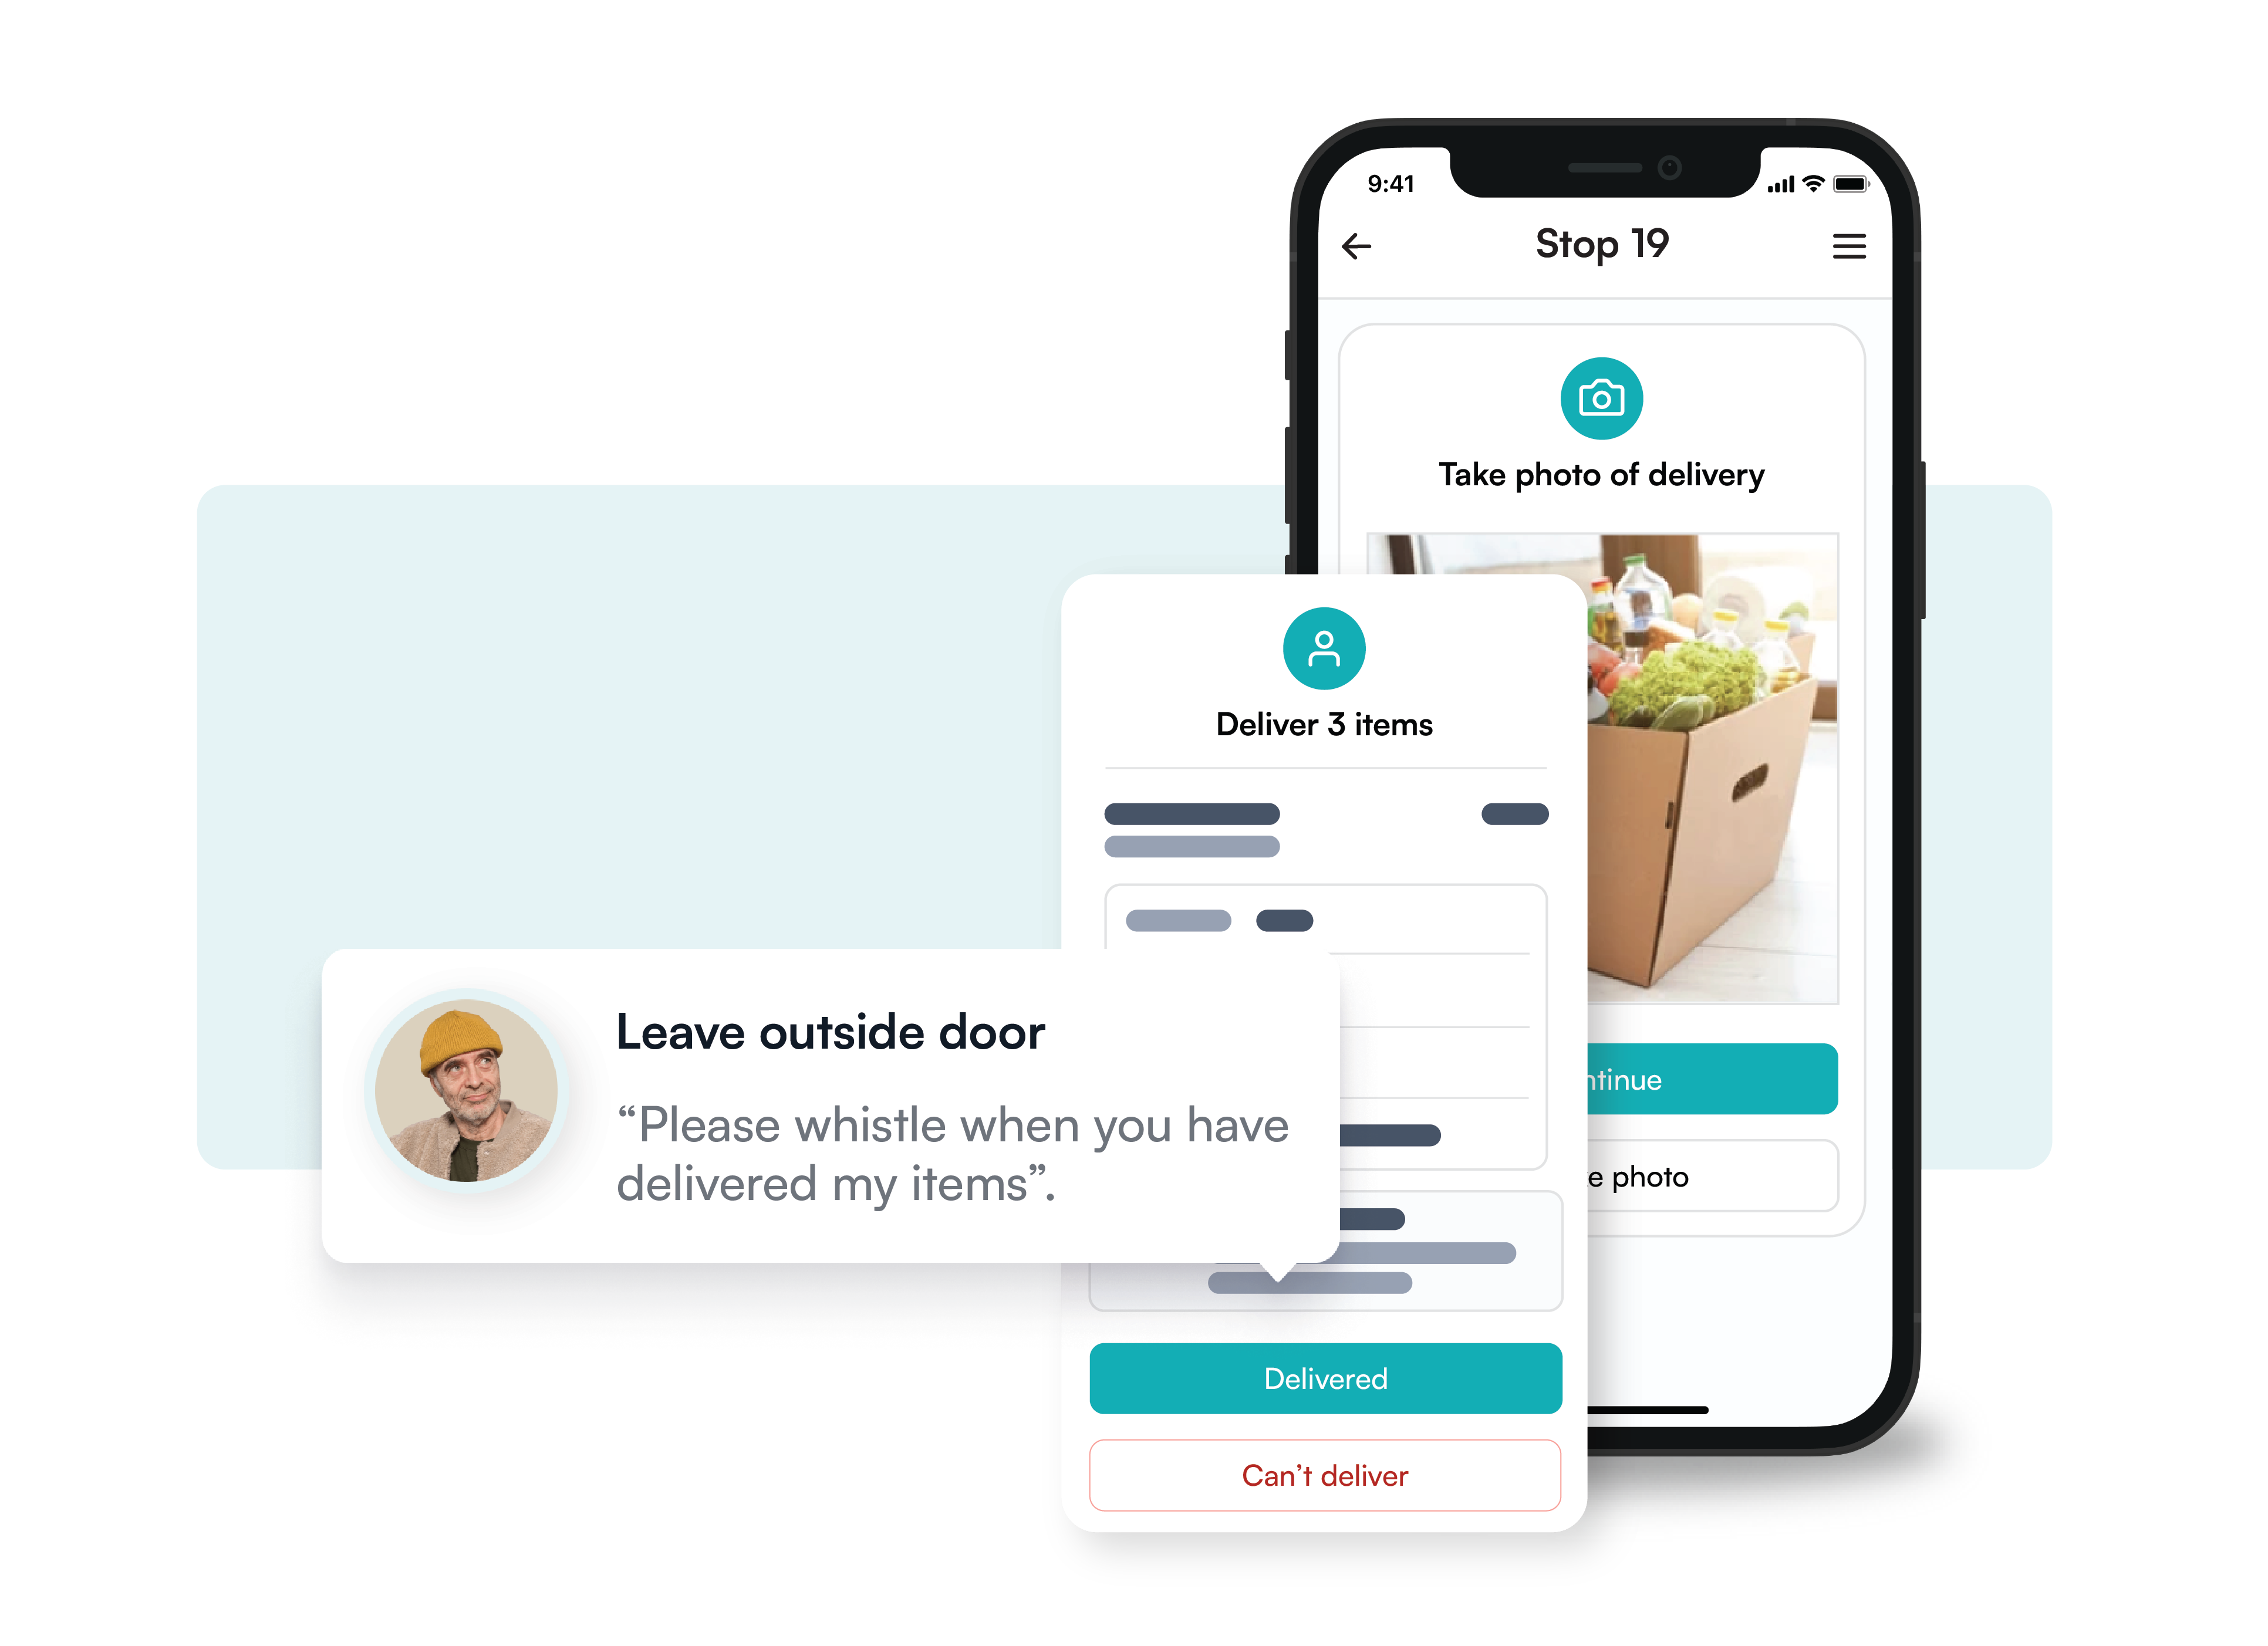 The driver can easily navigate their way to the right address. If the customer is not at home, the driver can deliver the package outside and document it with a photo as proof of delivery.